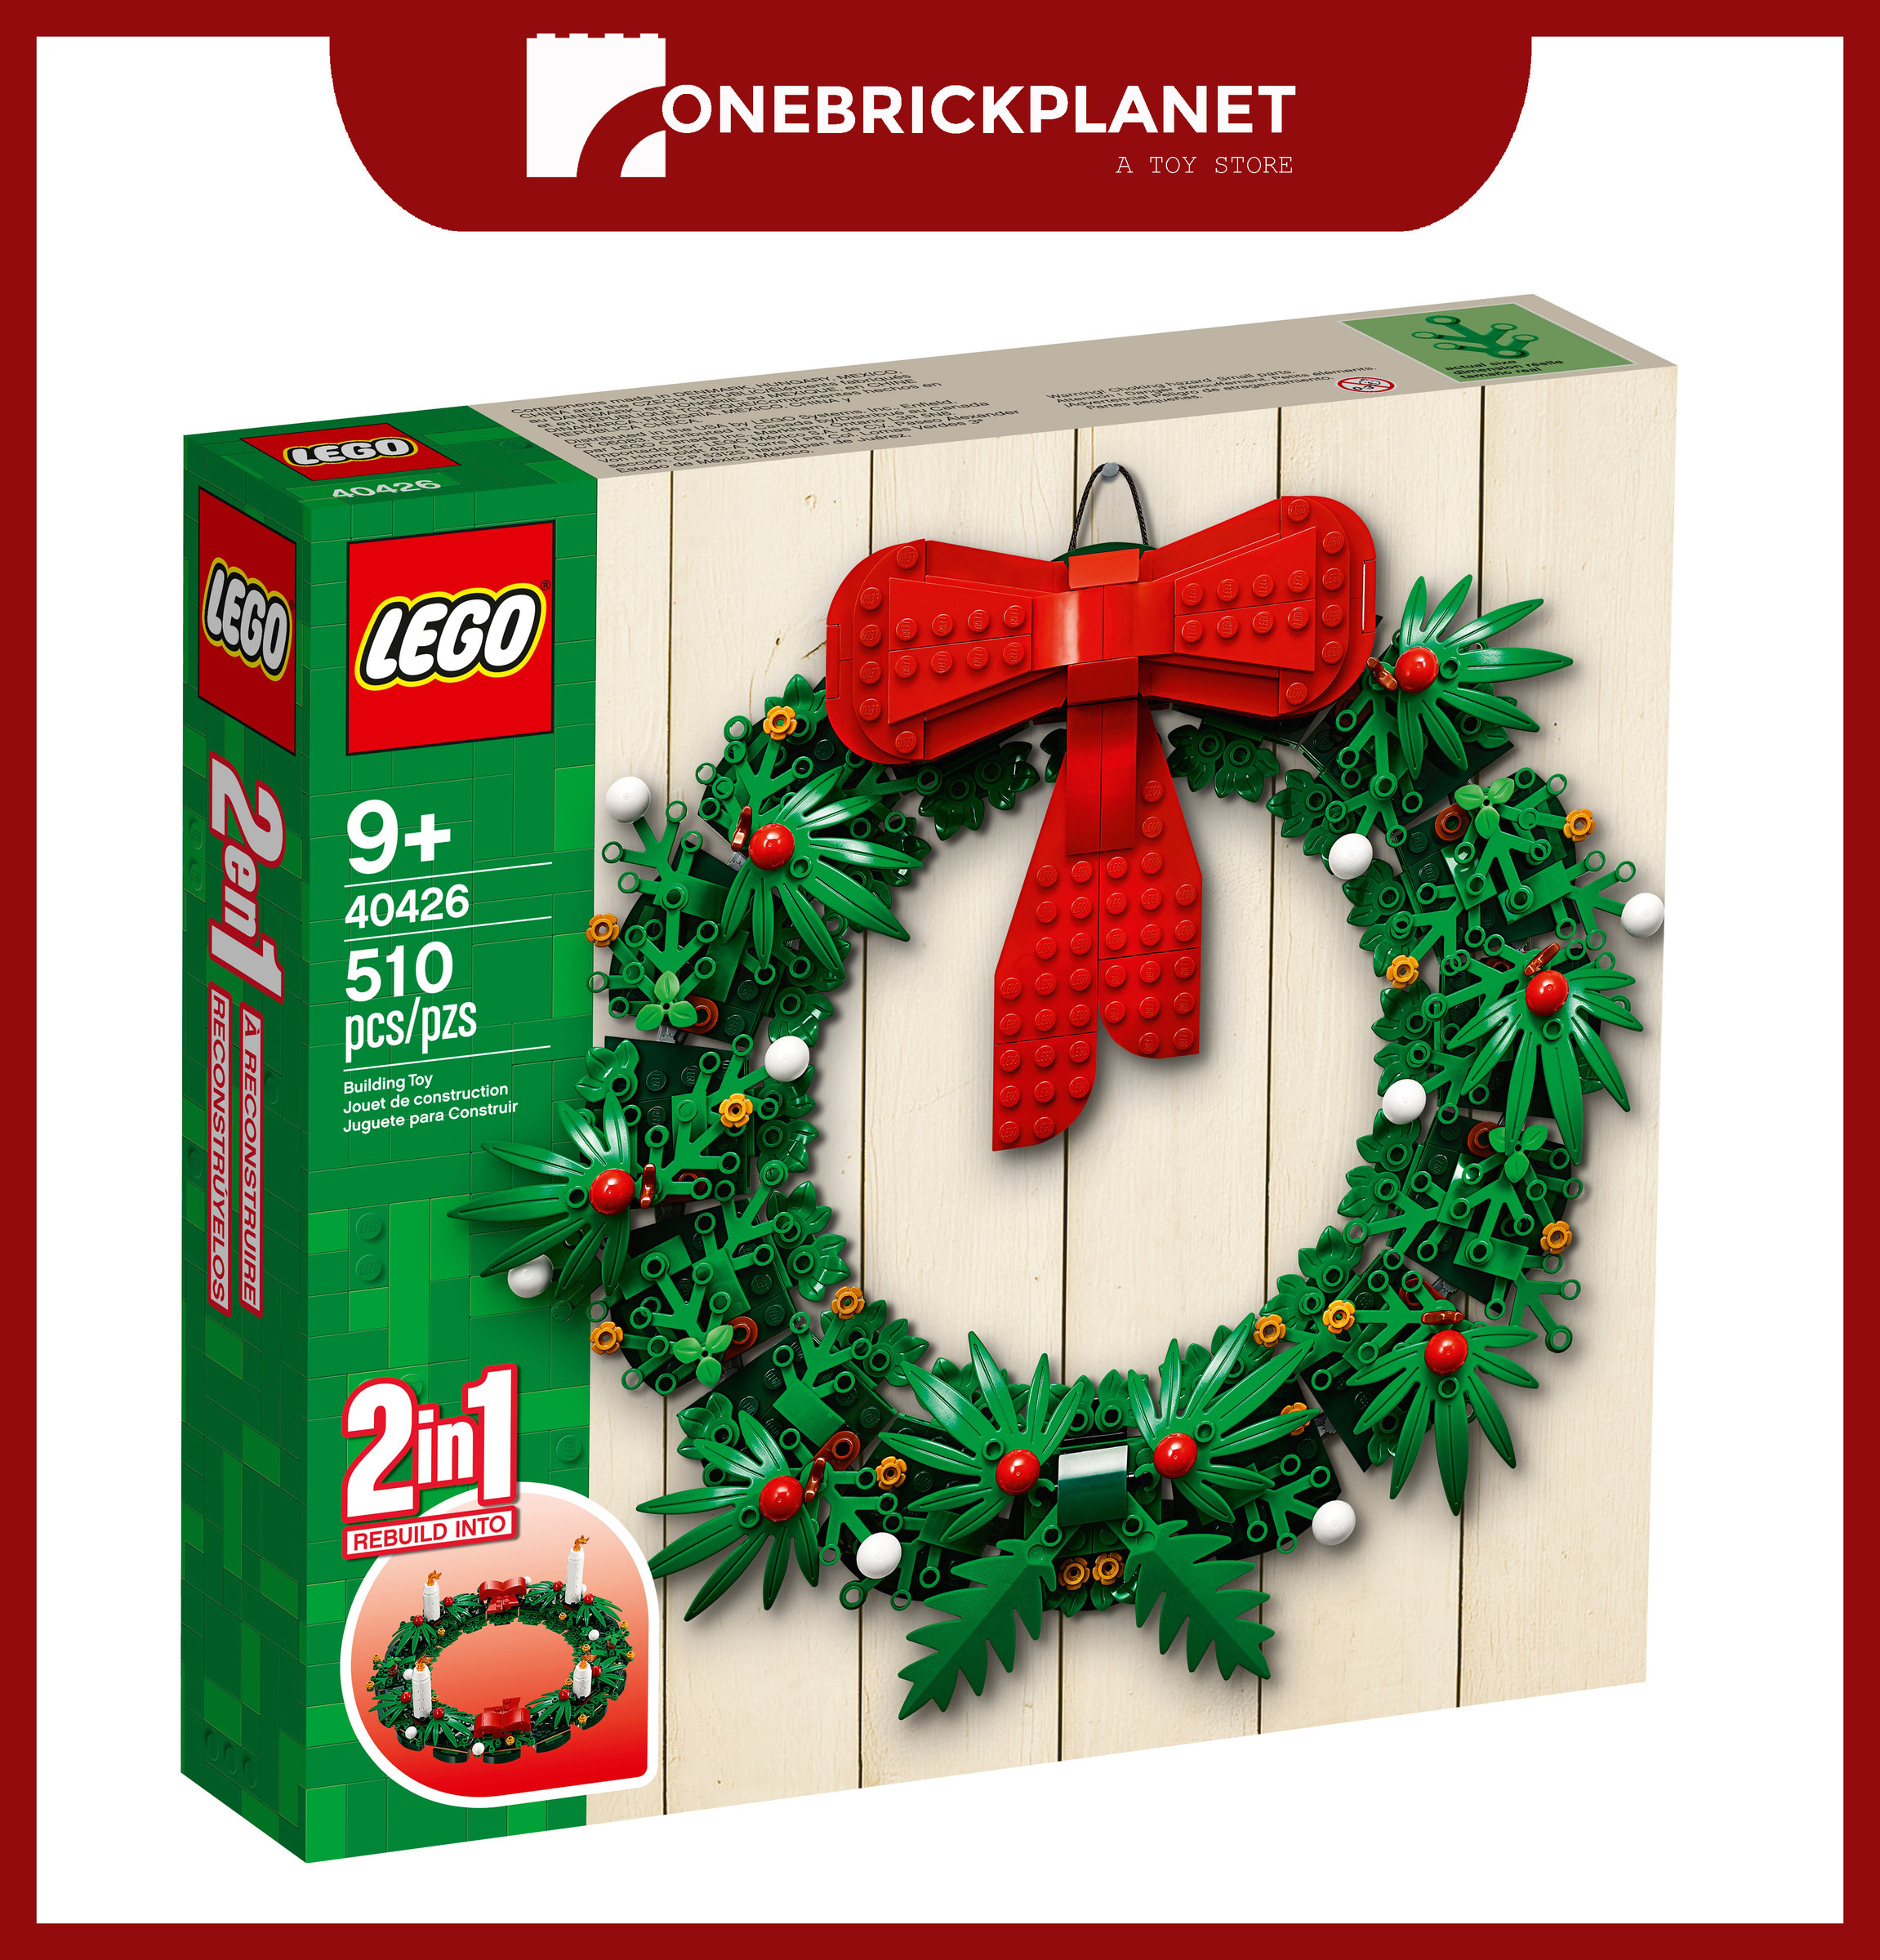 Christmas Wreath 2-in-1